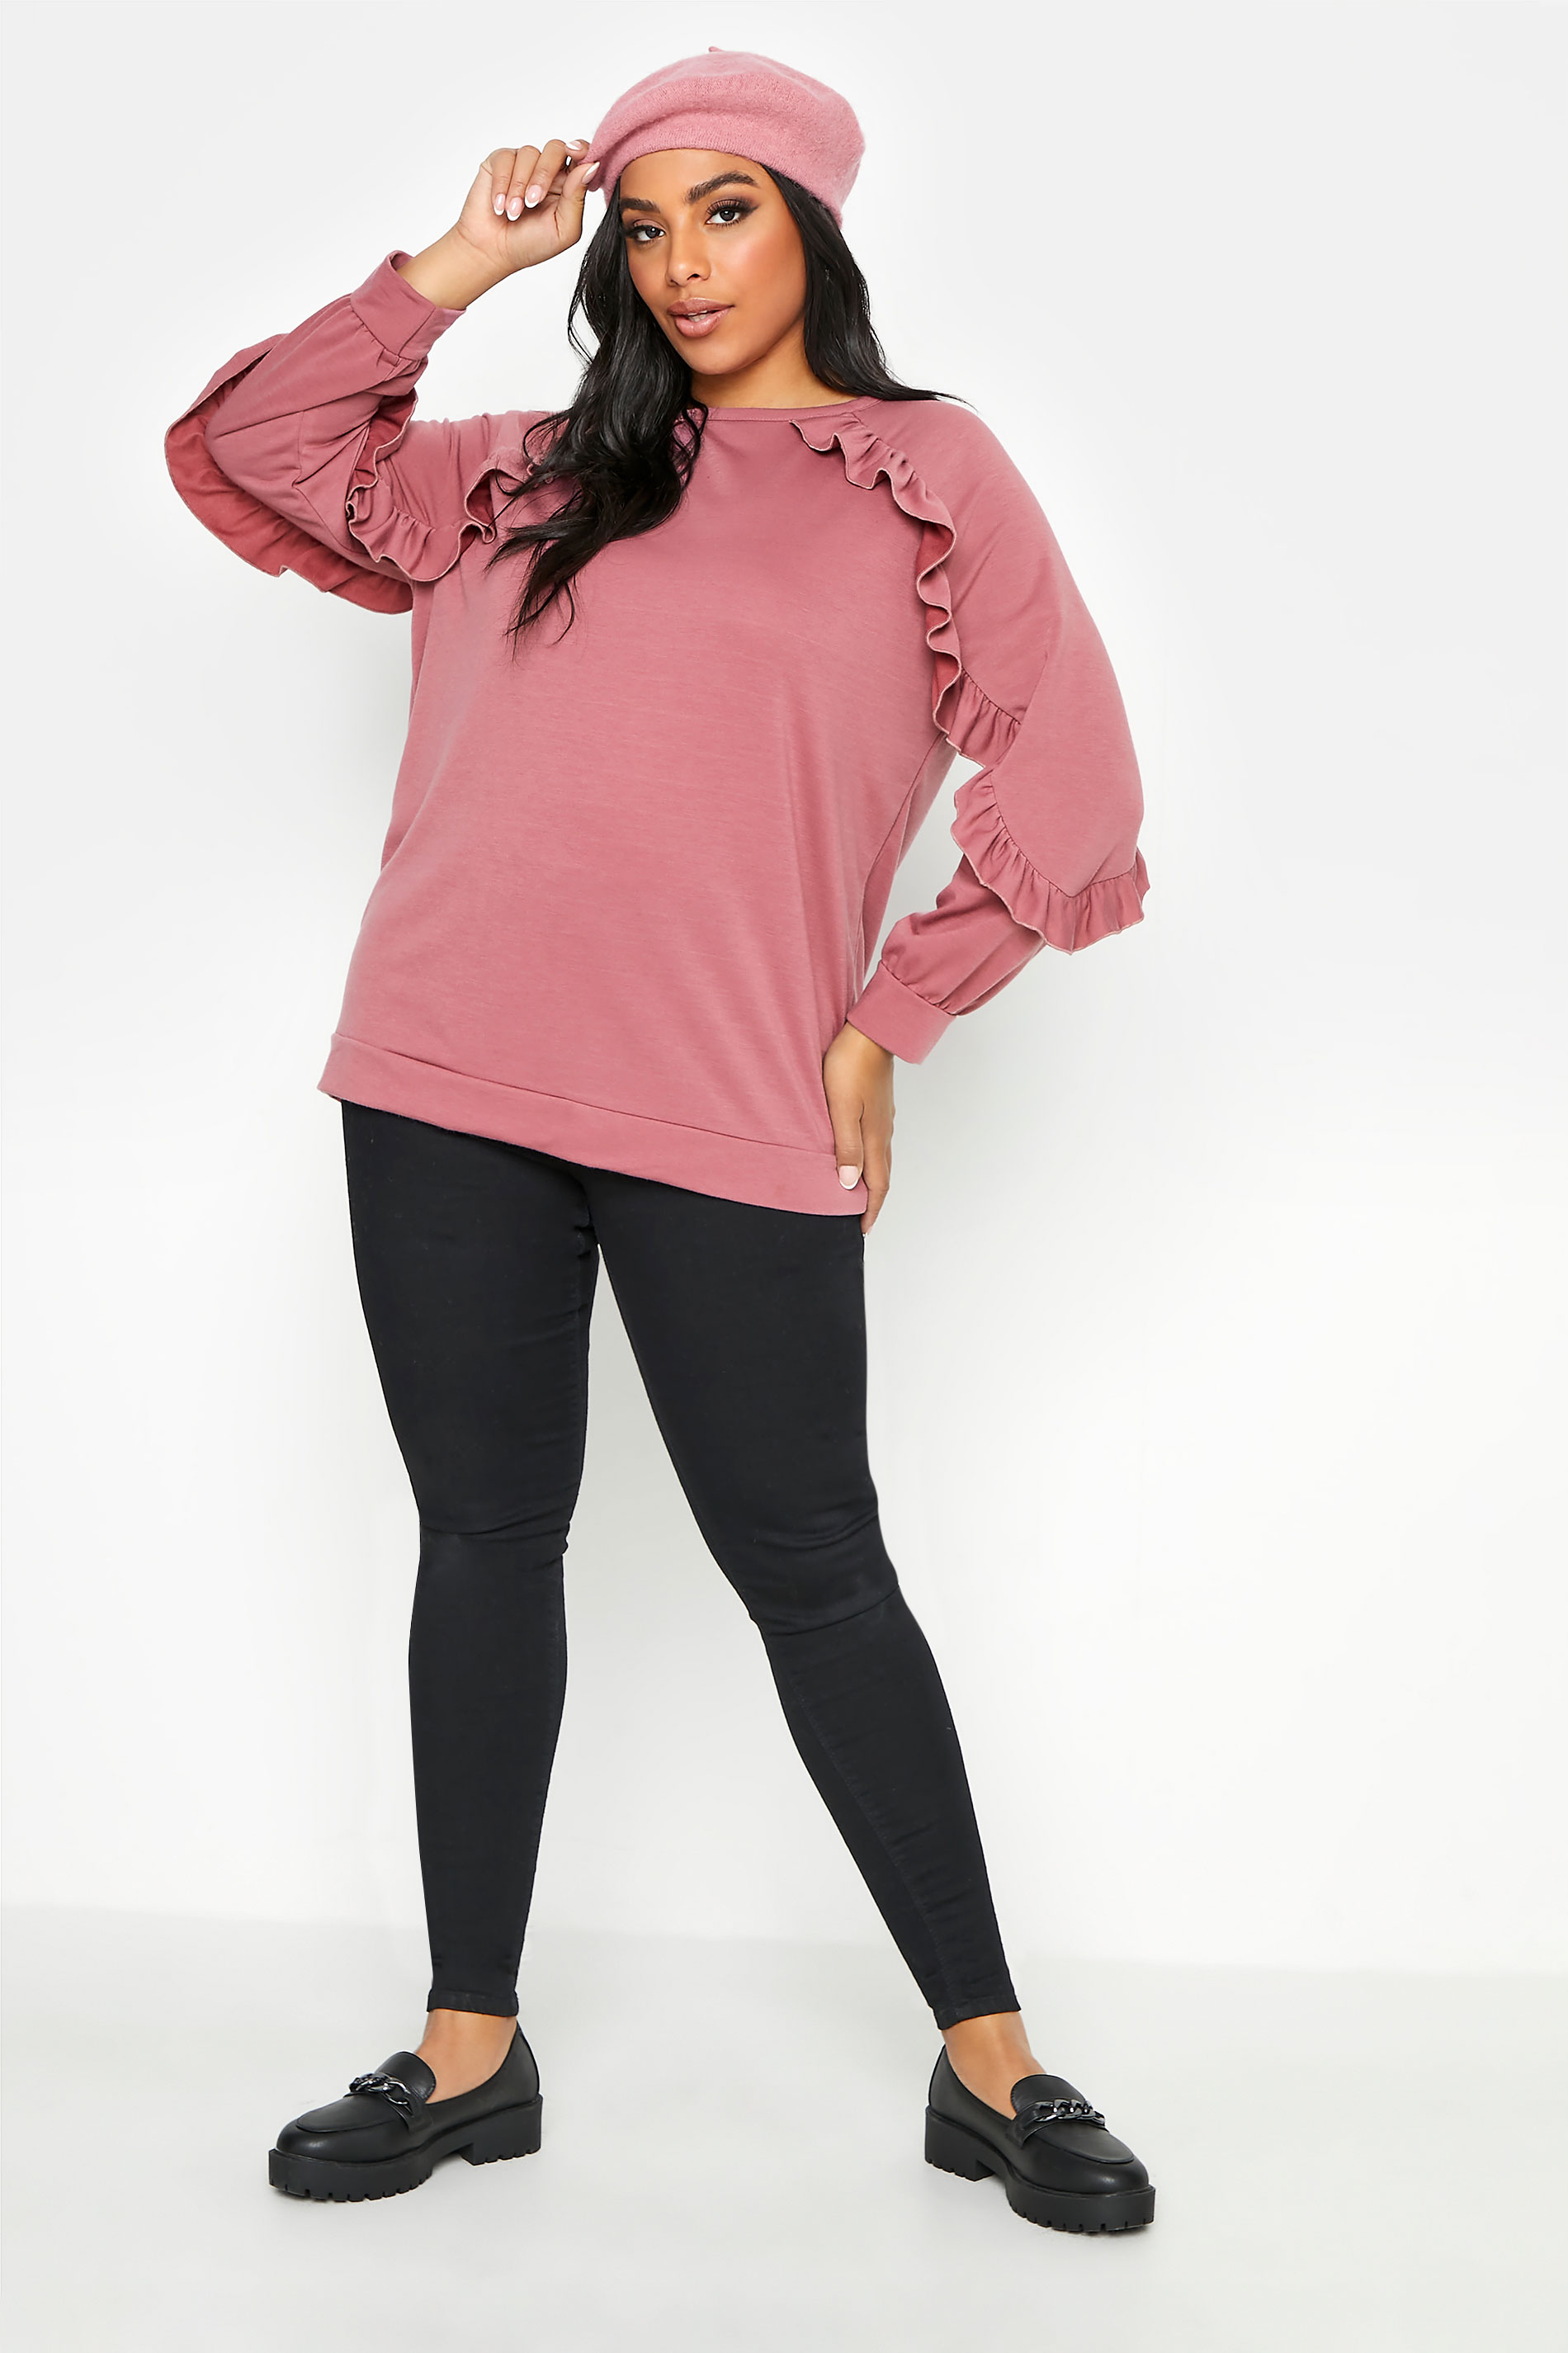 Grande taille  Tops Grande taille  Tops à Manches Longues | LIMITED COLLECTION - Sweatshirt Rose Volanté en Jersey - GY98579